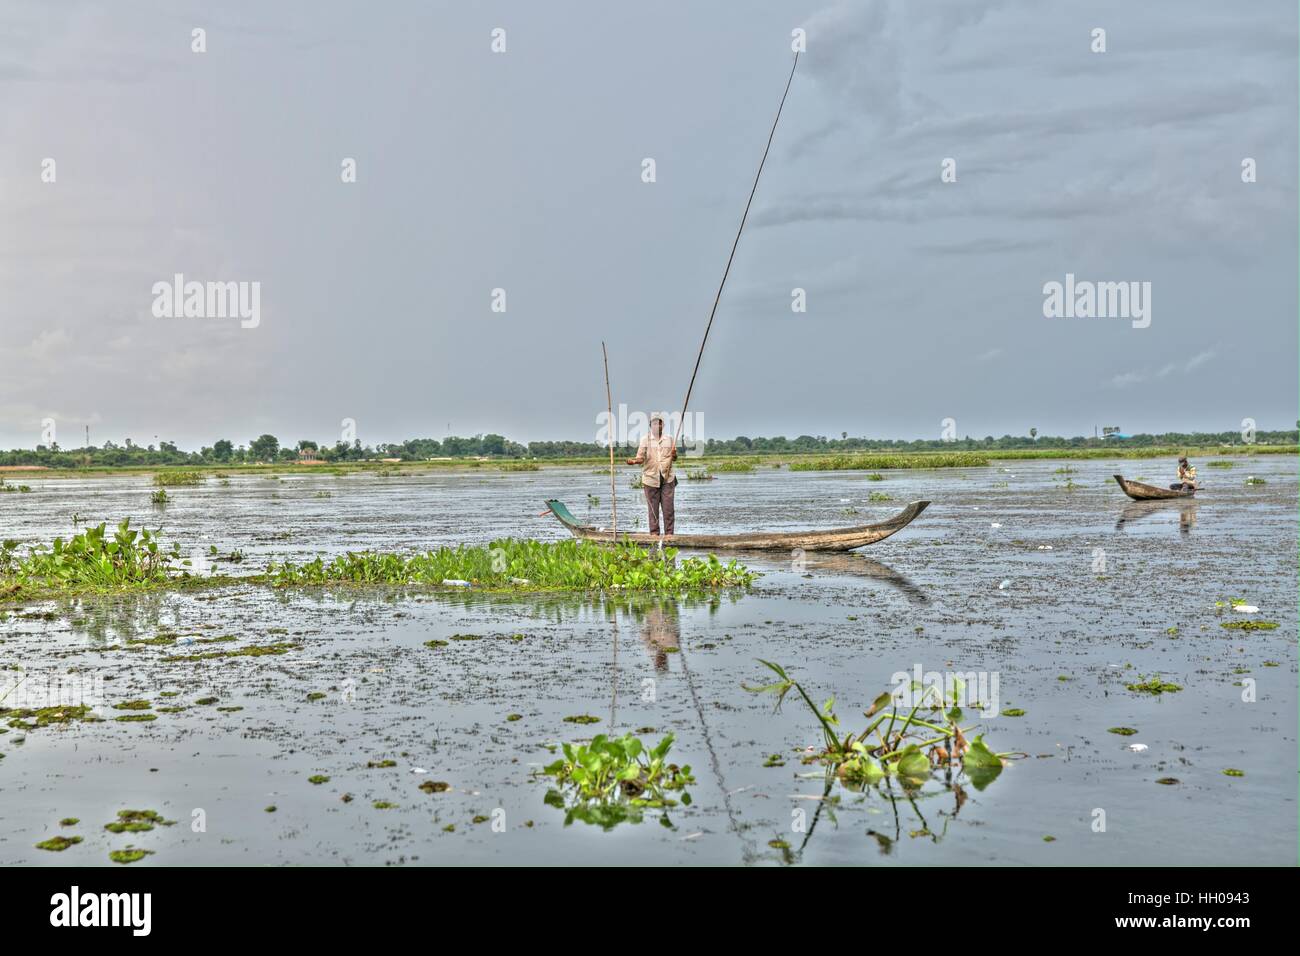 This is an idyllic scene with a fisherman standing in his boat fishing on Tonle (lake) Bati, Phnom Penh, Cambodia. Stock Photo